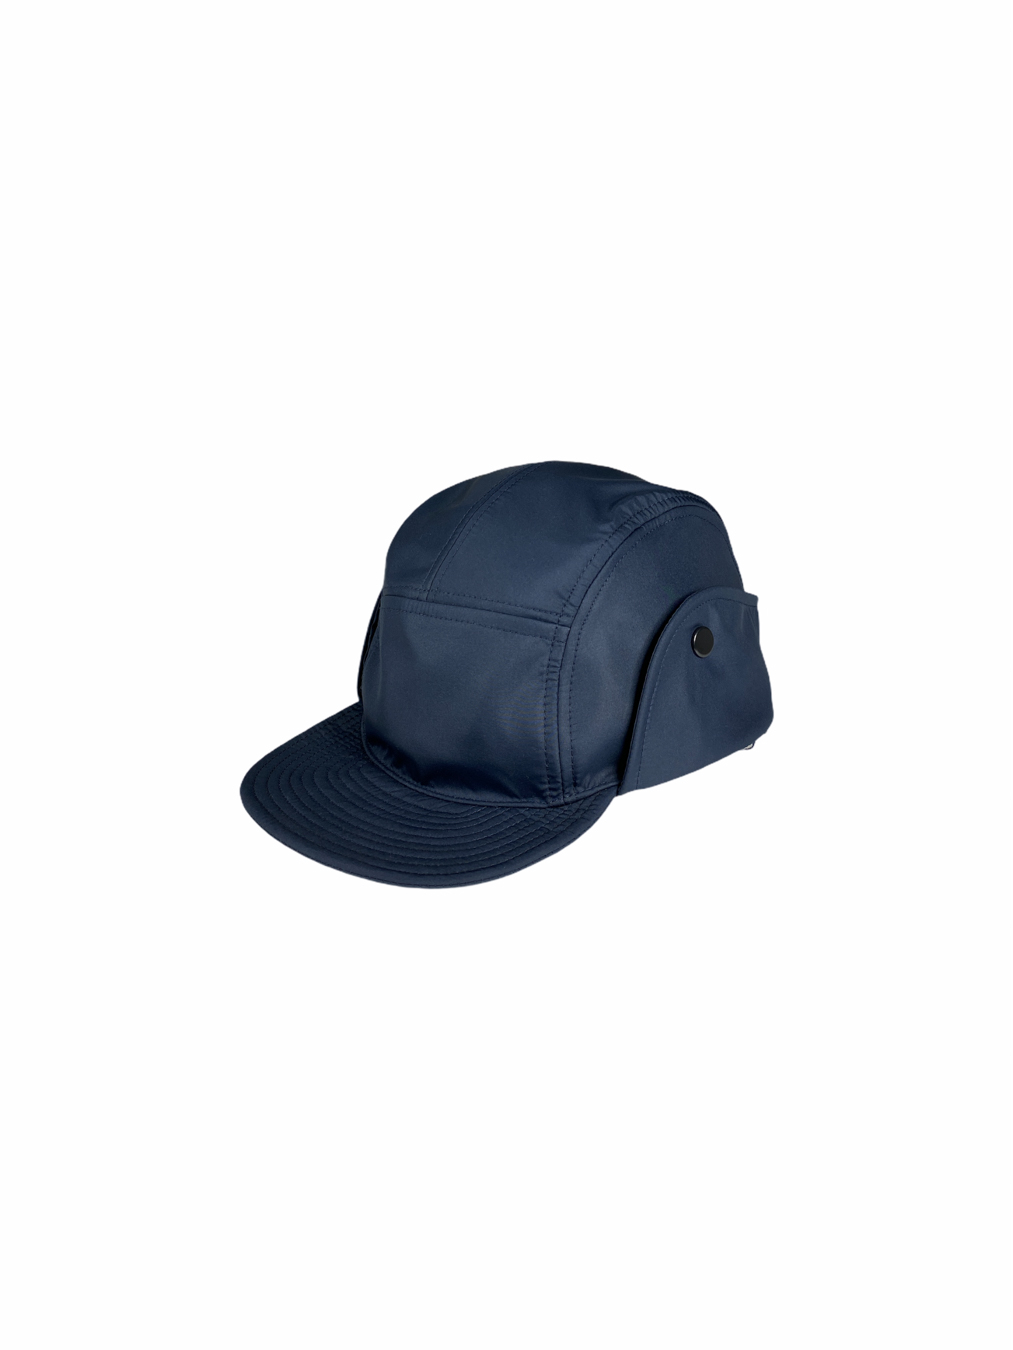 New Camp Cap With Ear Flap (Navy) 